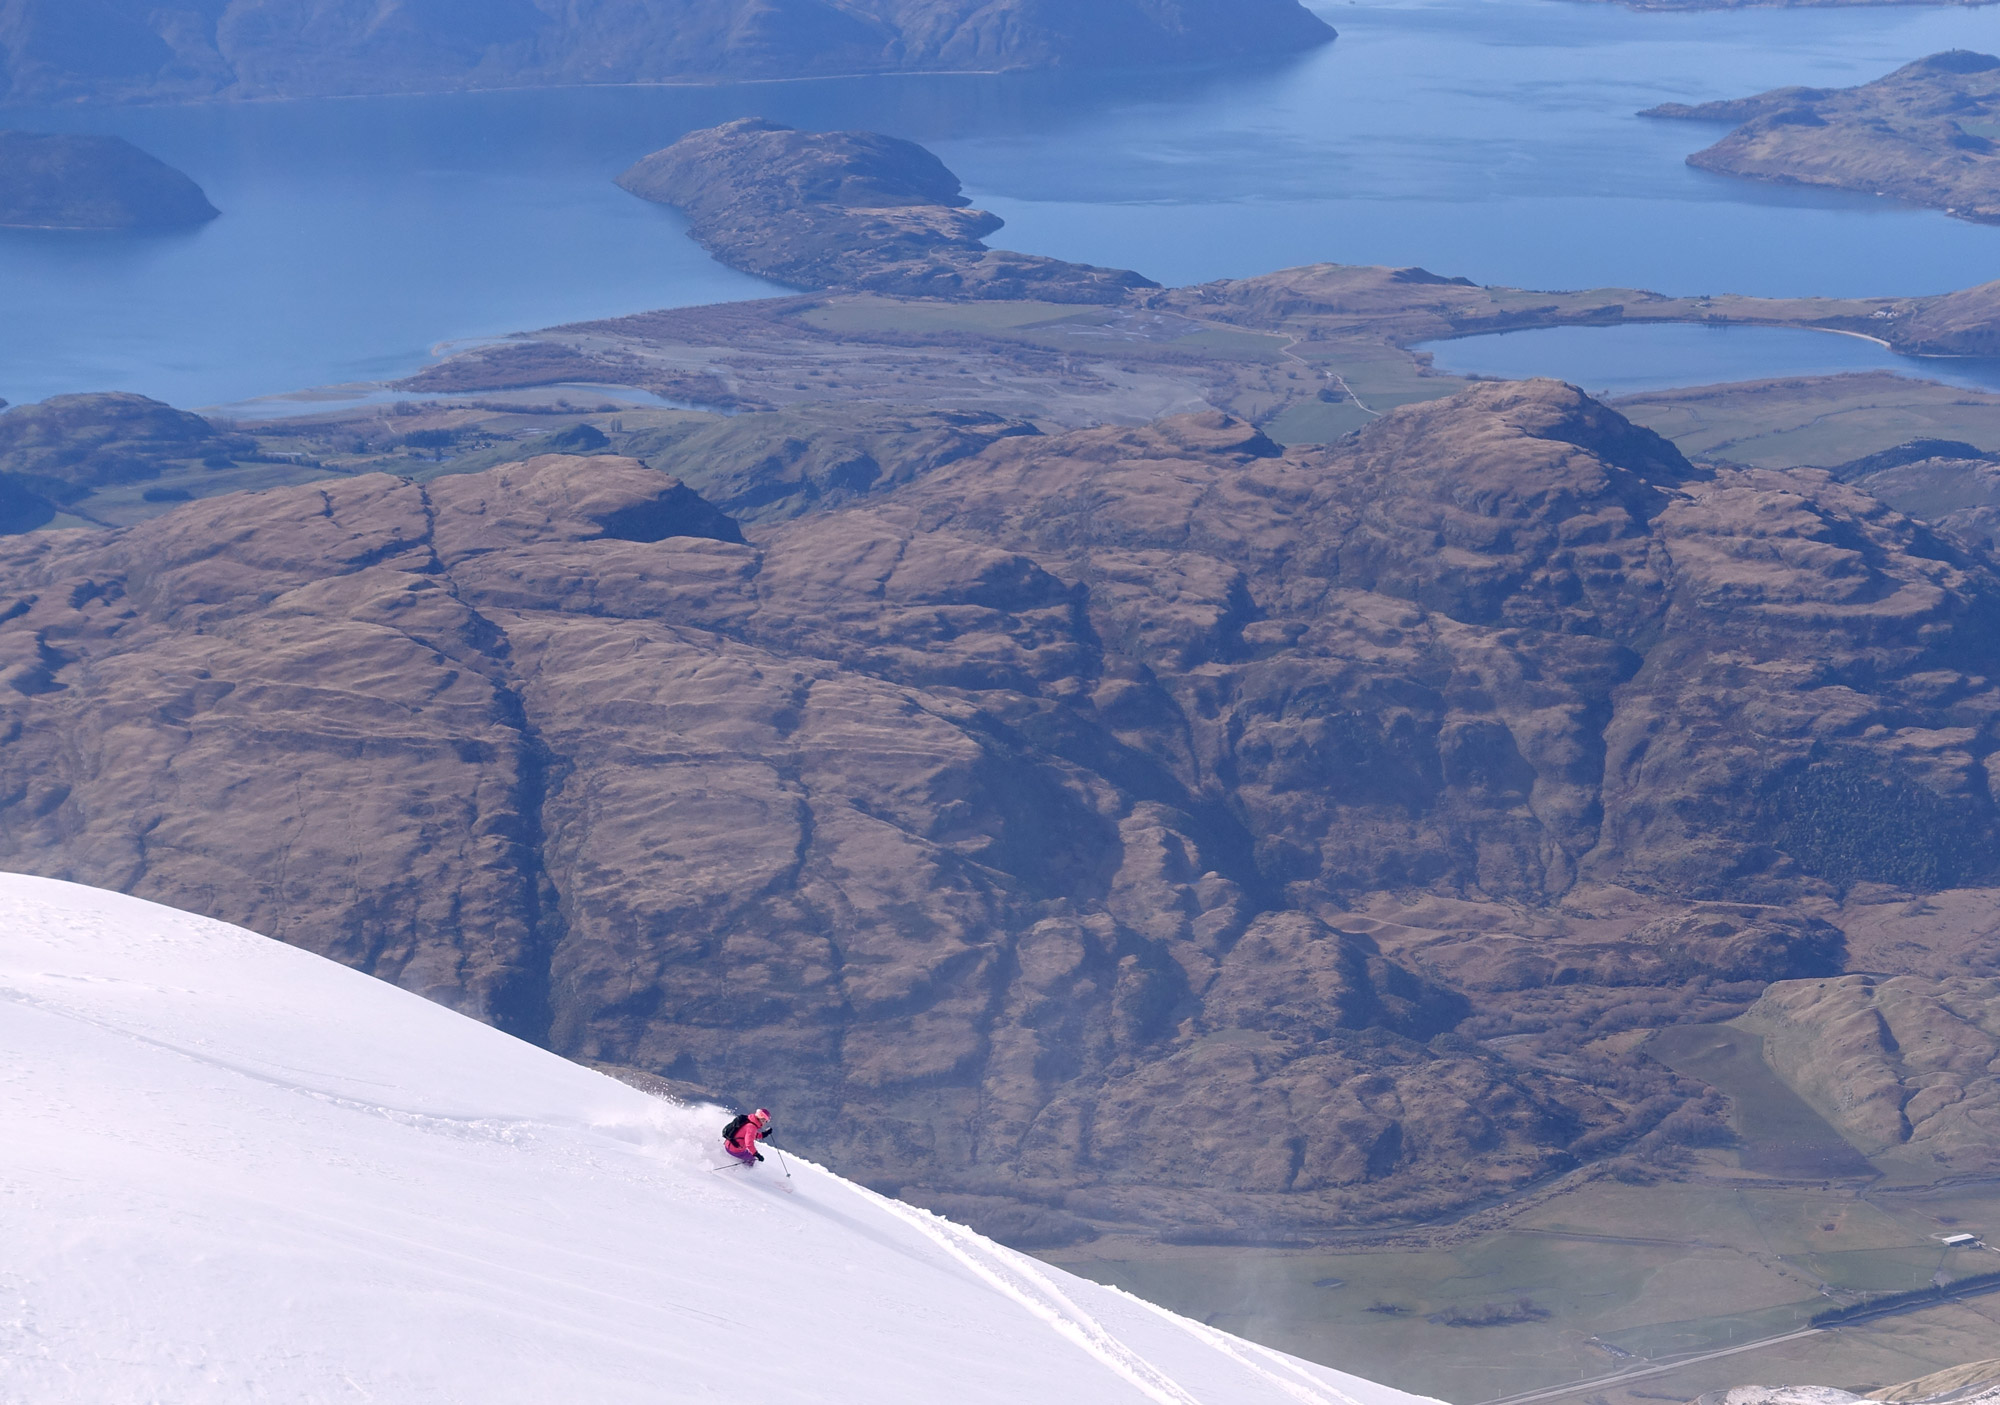 Best Skiing in New Zealand - Overall: Treble Cone